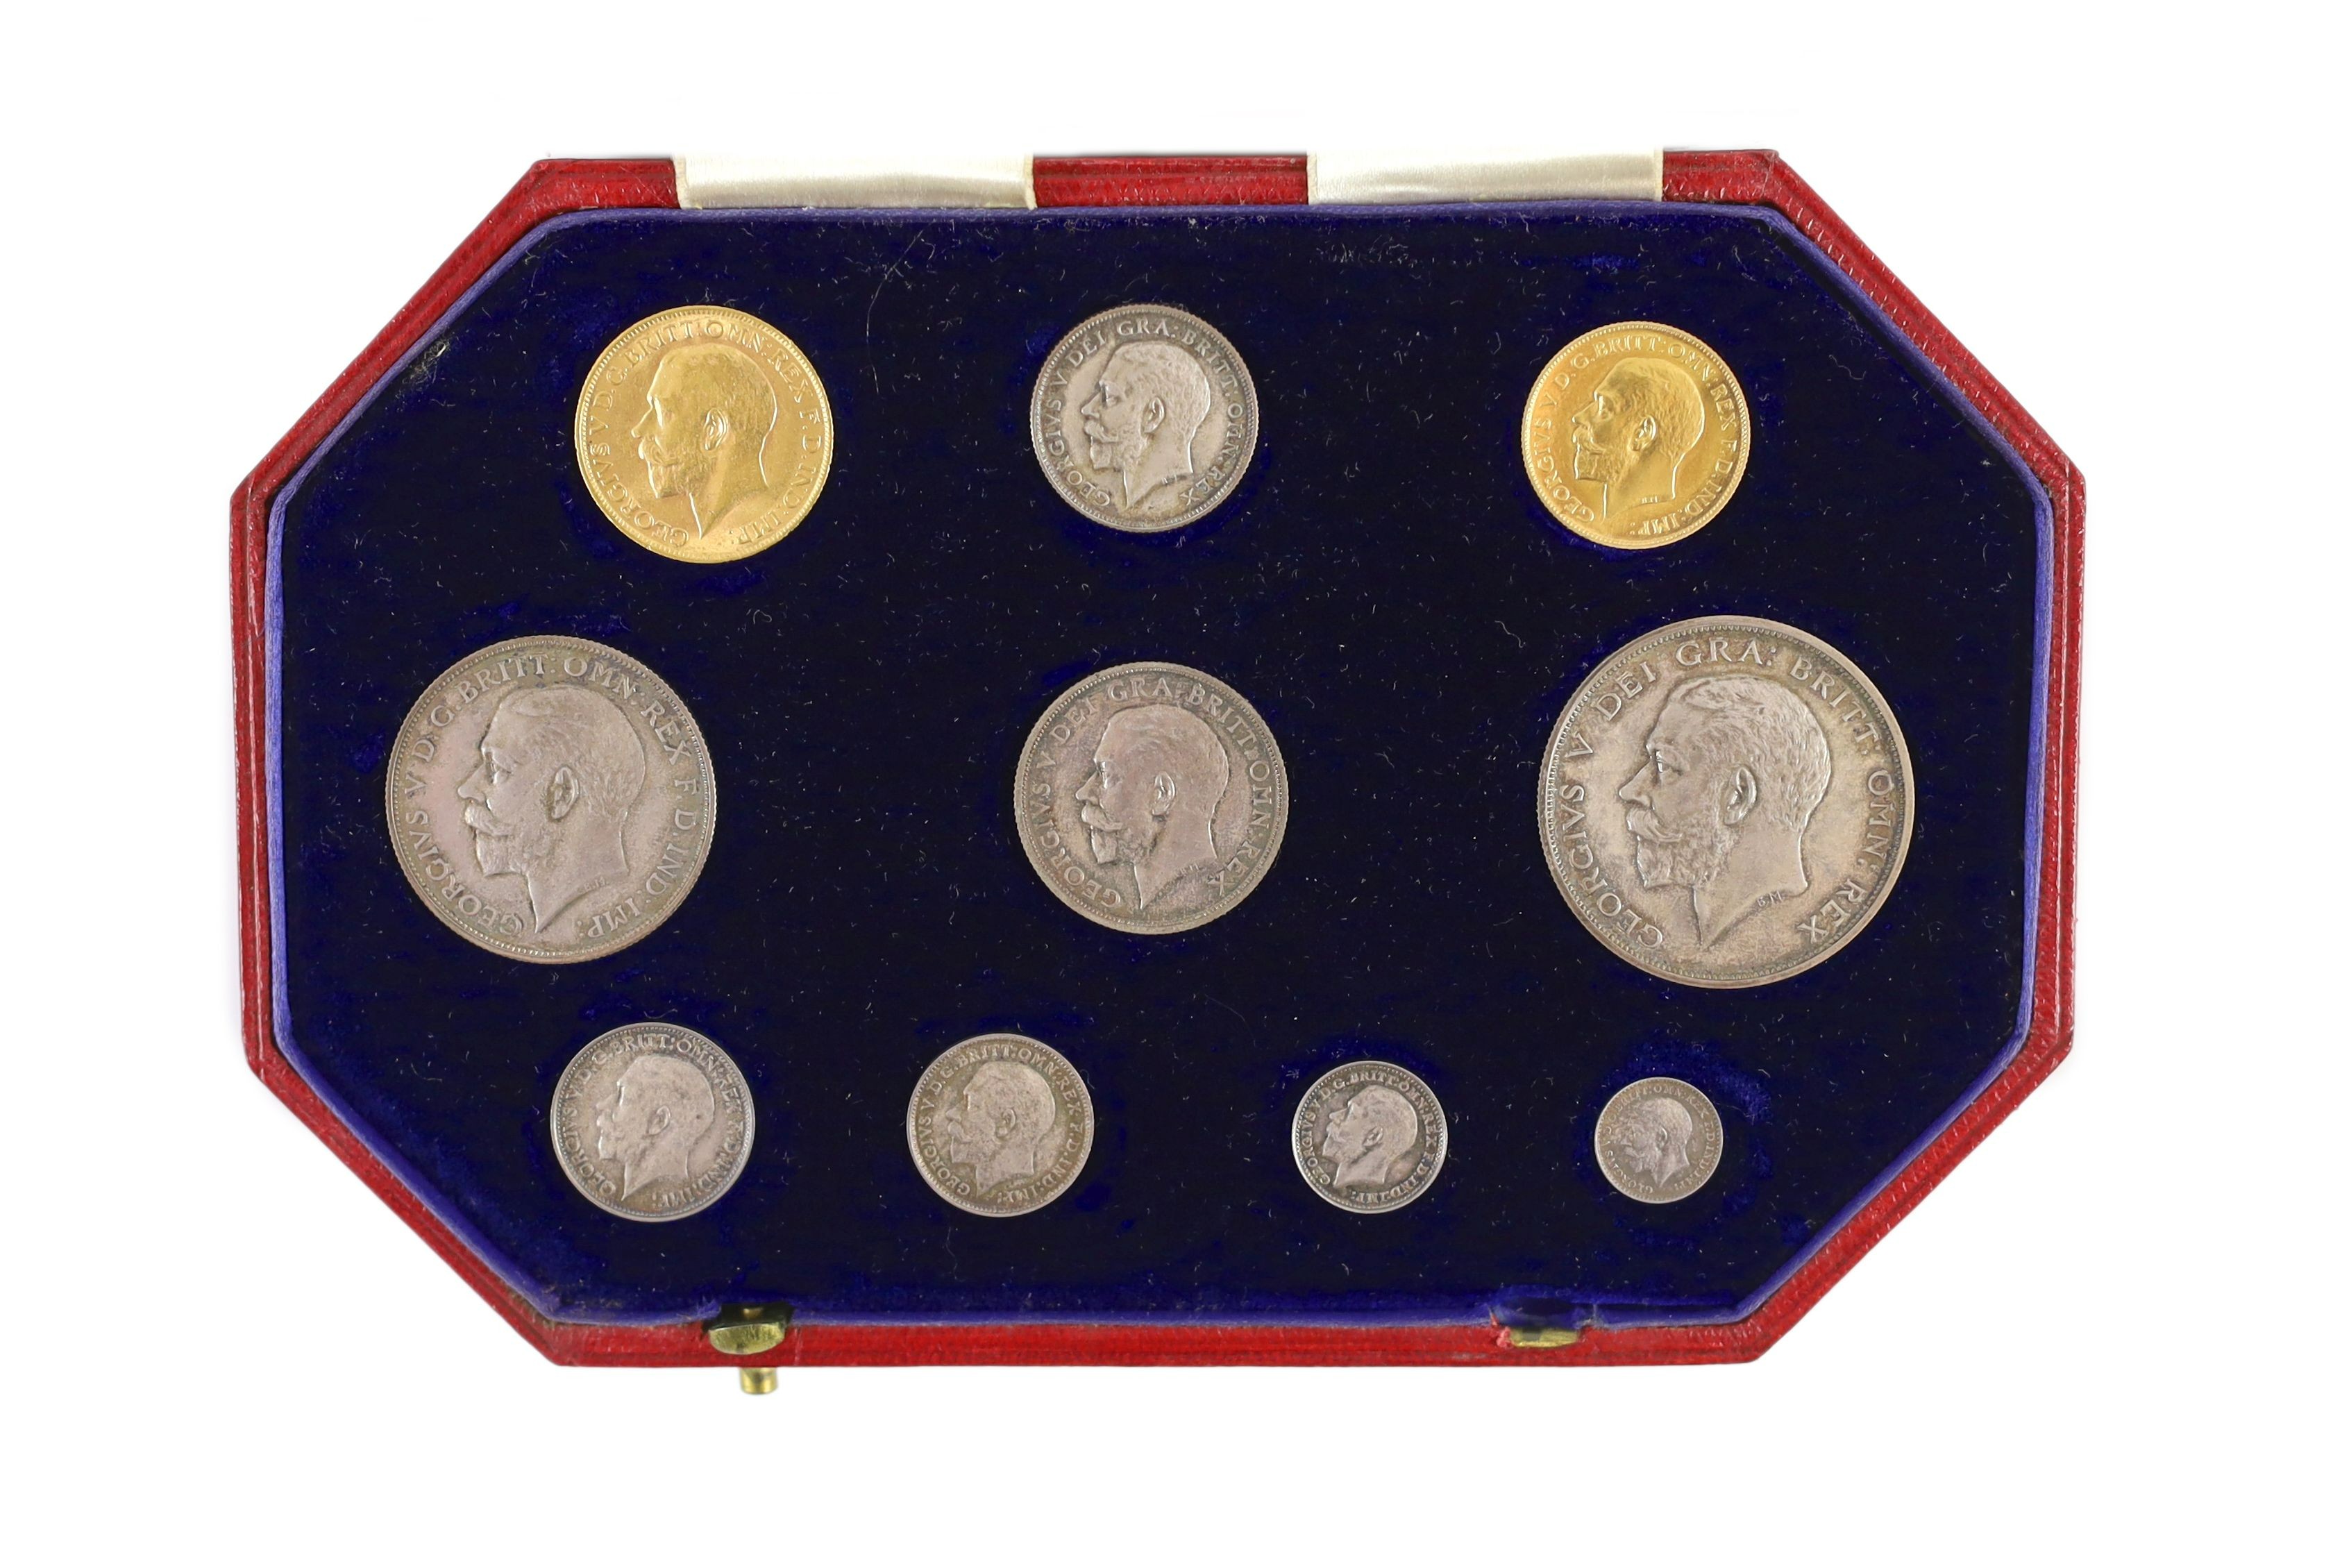 UK coins, a cased George V 1911 coronation gold and silver proof ten coin set